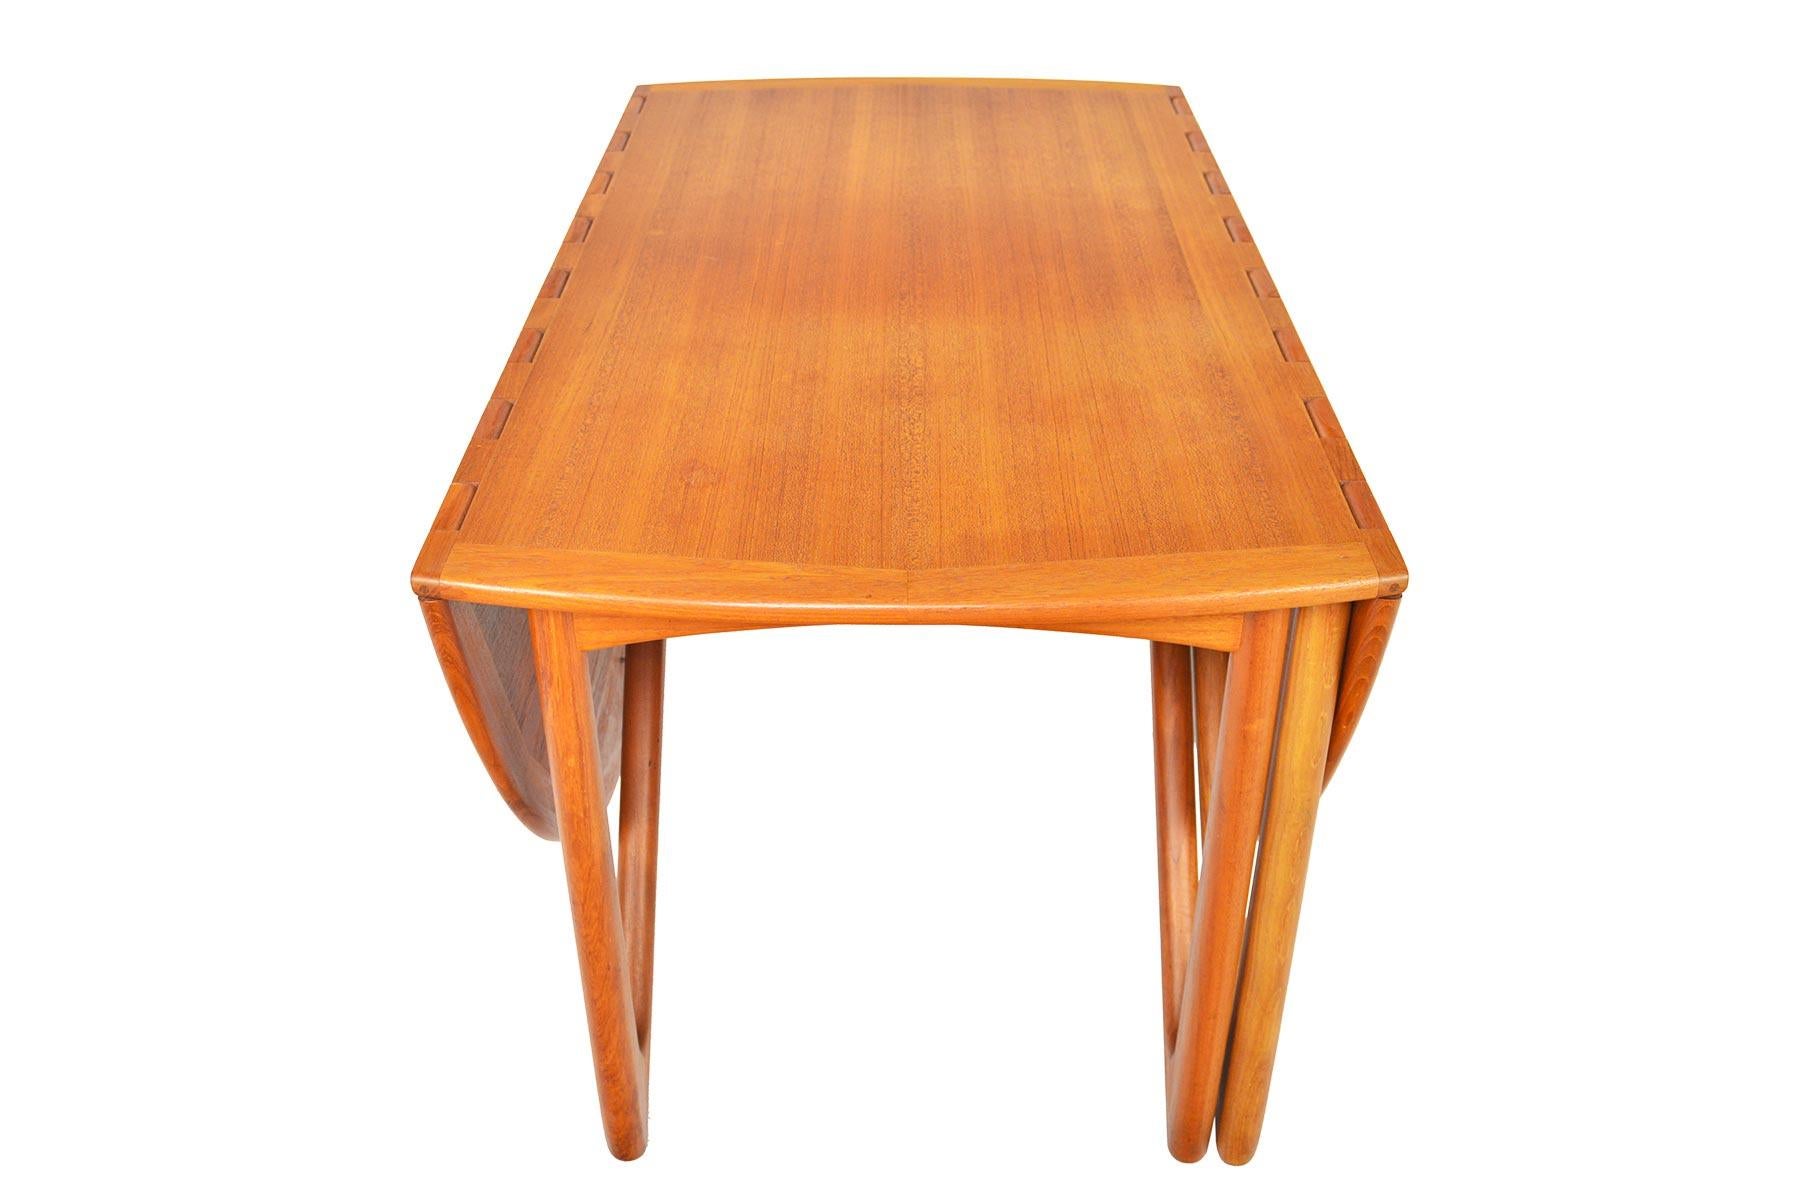 This Danish modern drop leaf dining table model 304 was designed by Niels Kofoed for Kofoed Møbelfabrik in the mid-1960s. This stunning table features two drop leaves which are supported by the articulating “gateleg” design. Restoration to top is